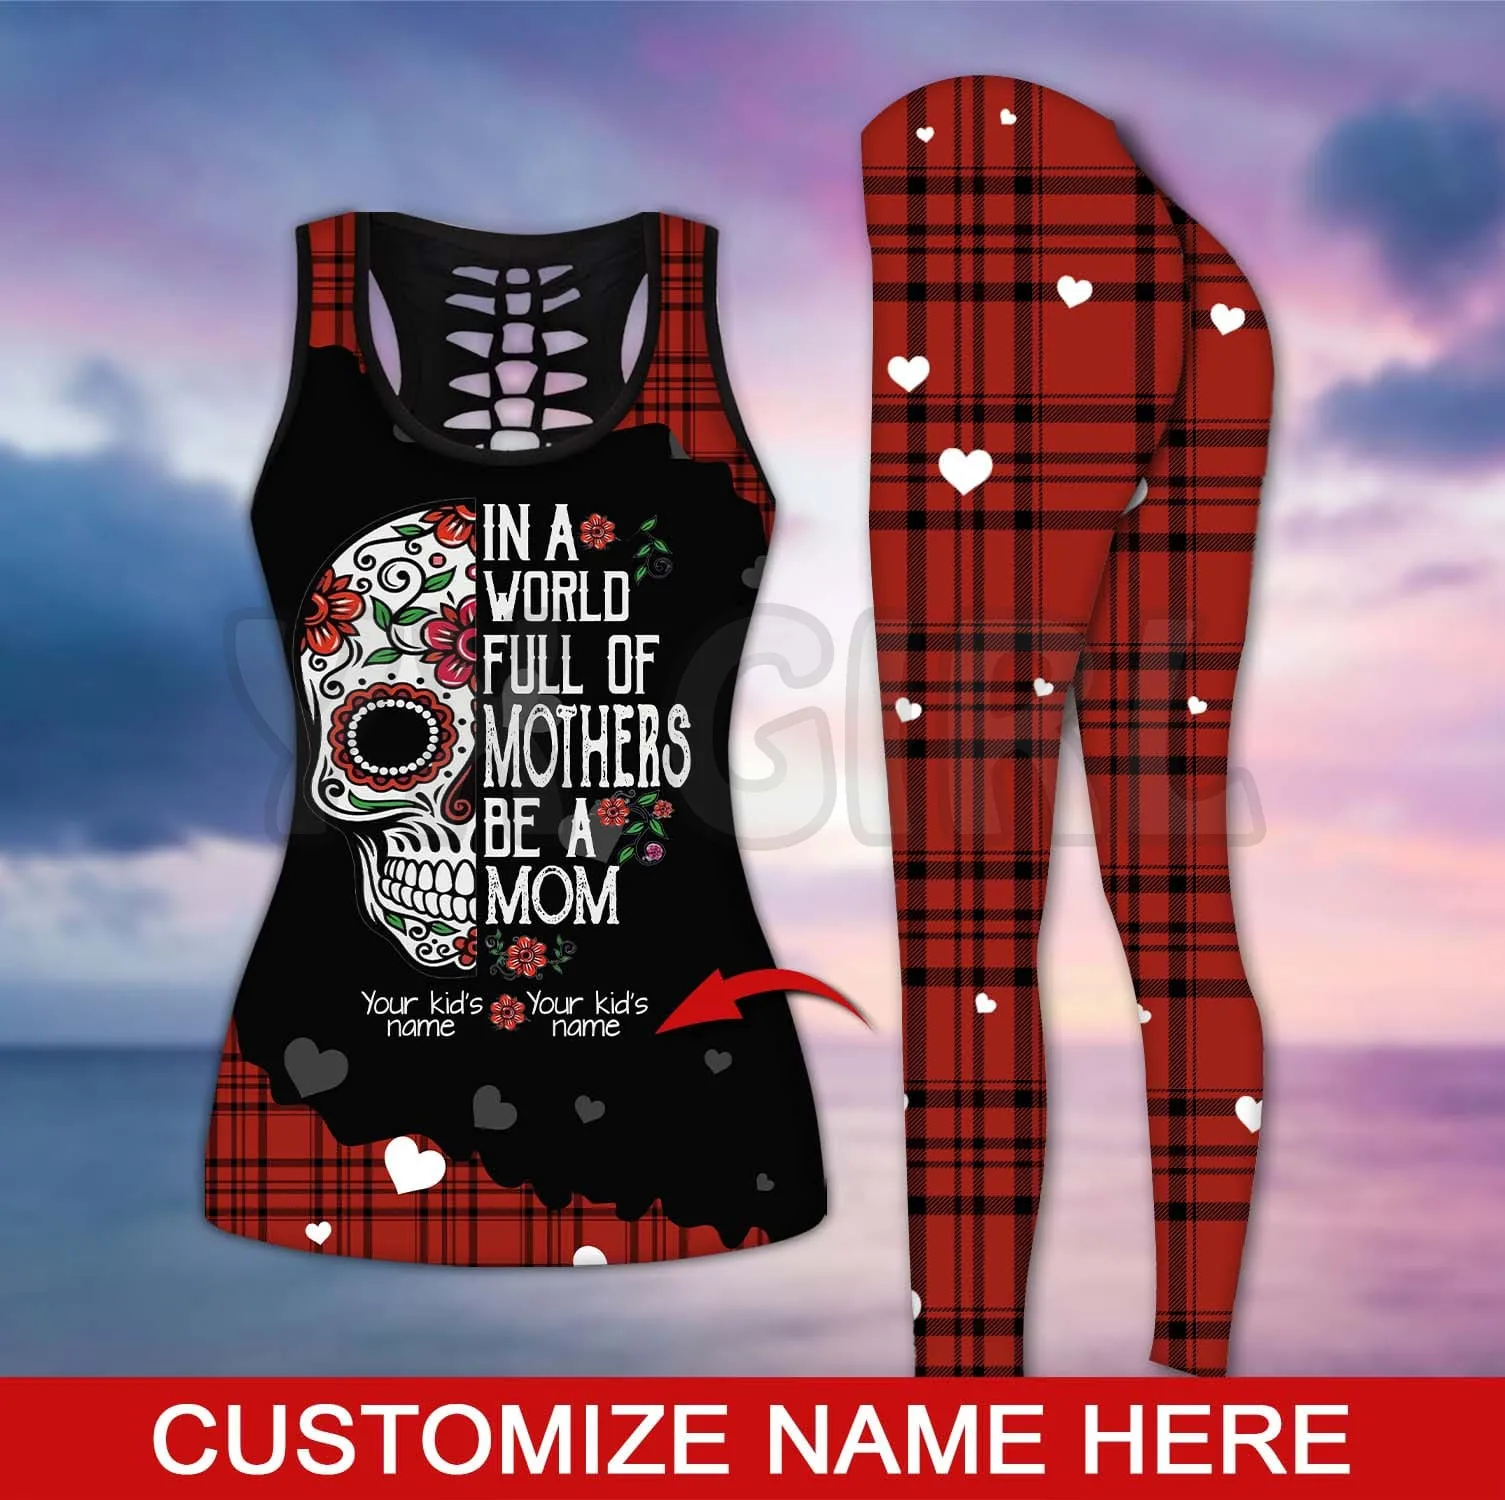 Be A Mom Custom You Name  3D Printed Tank Top+Legging Combo Outfit Yoga Fitness Legging Women